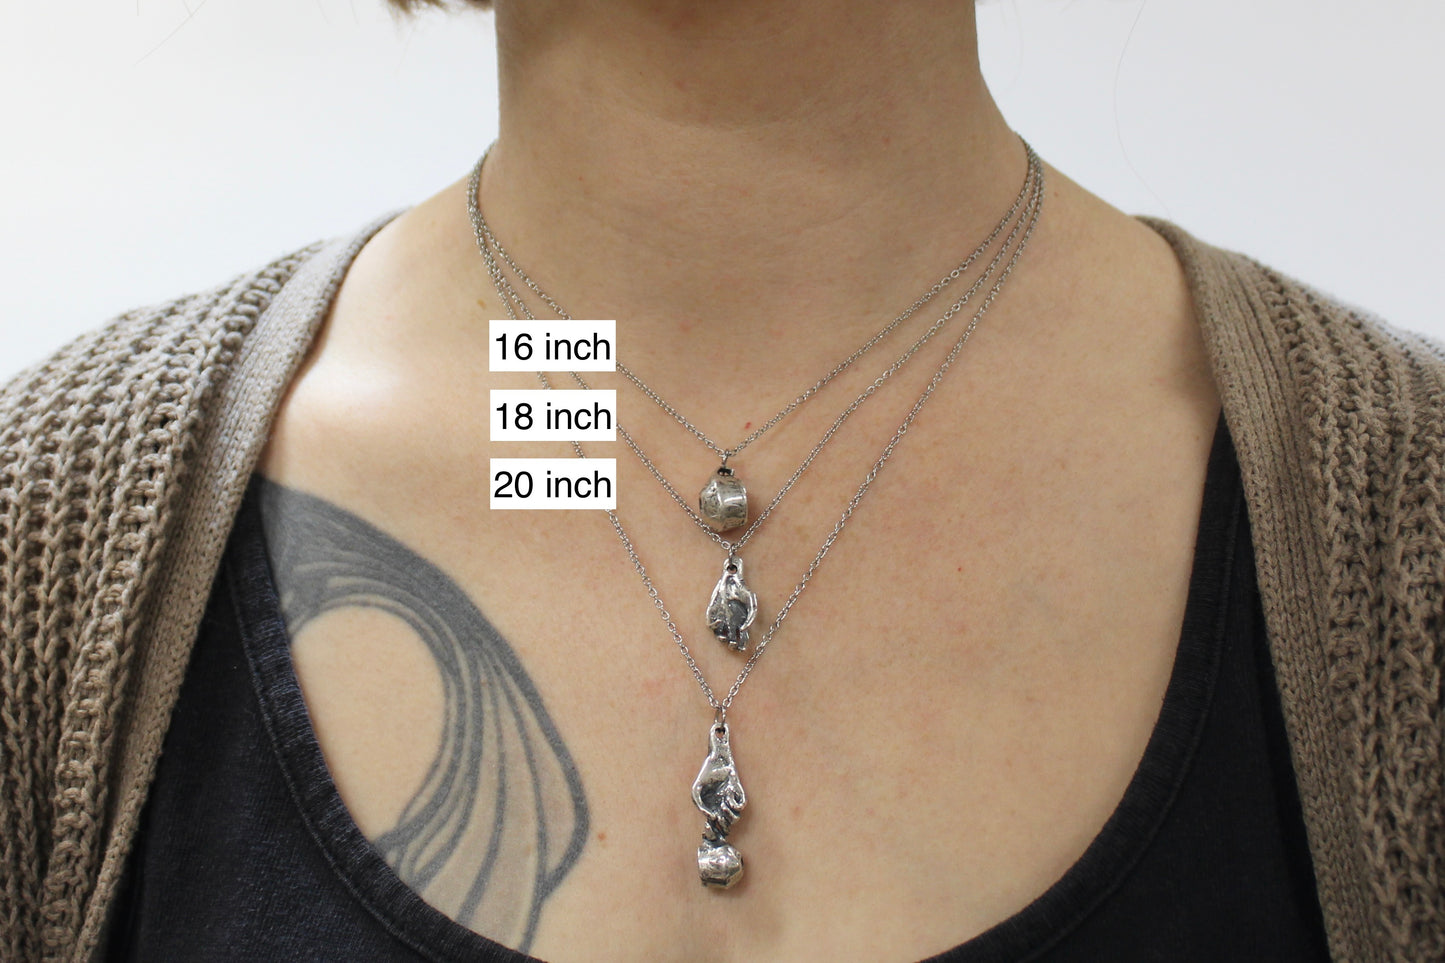 SILVER Ace of Cups Pendant Necklace. Sterling silver. 1" x 2". Select chain length 16, 18, 20 inch